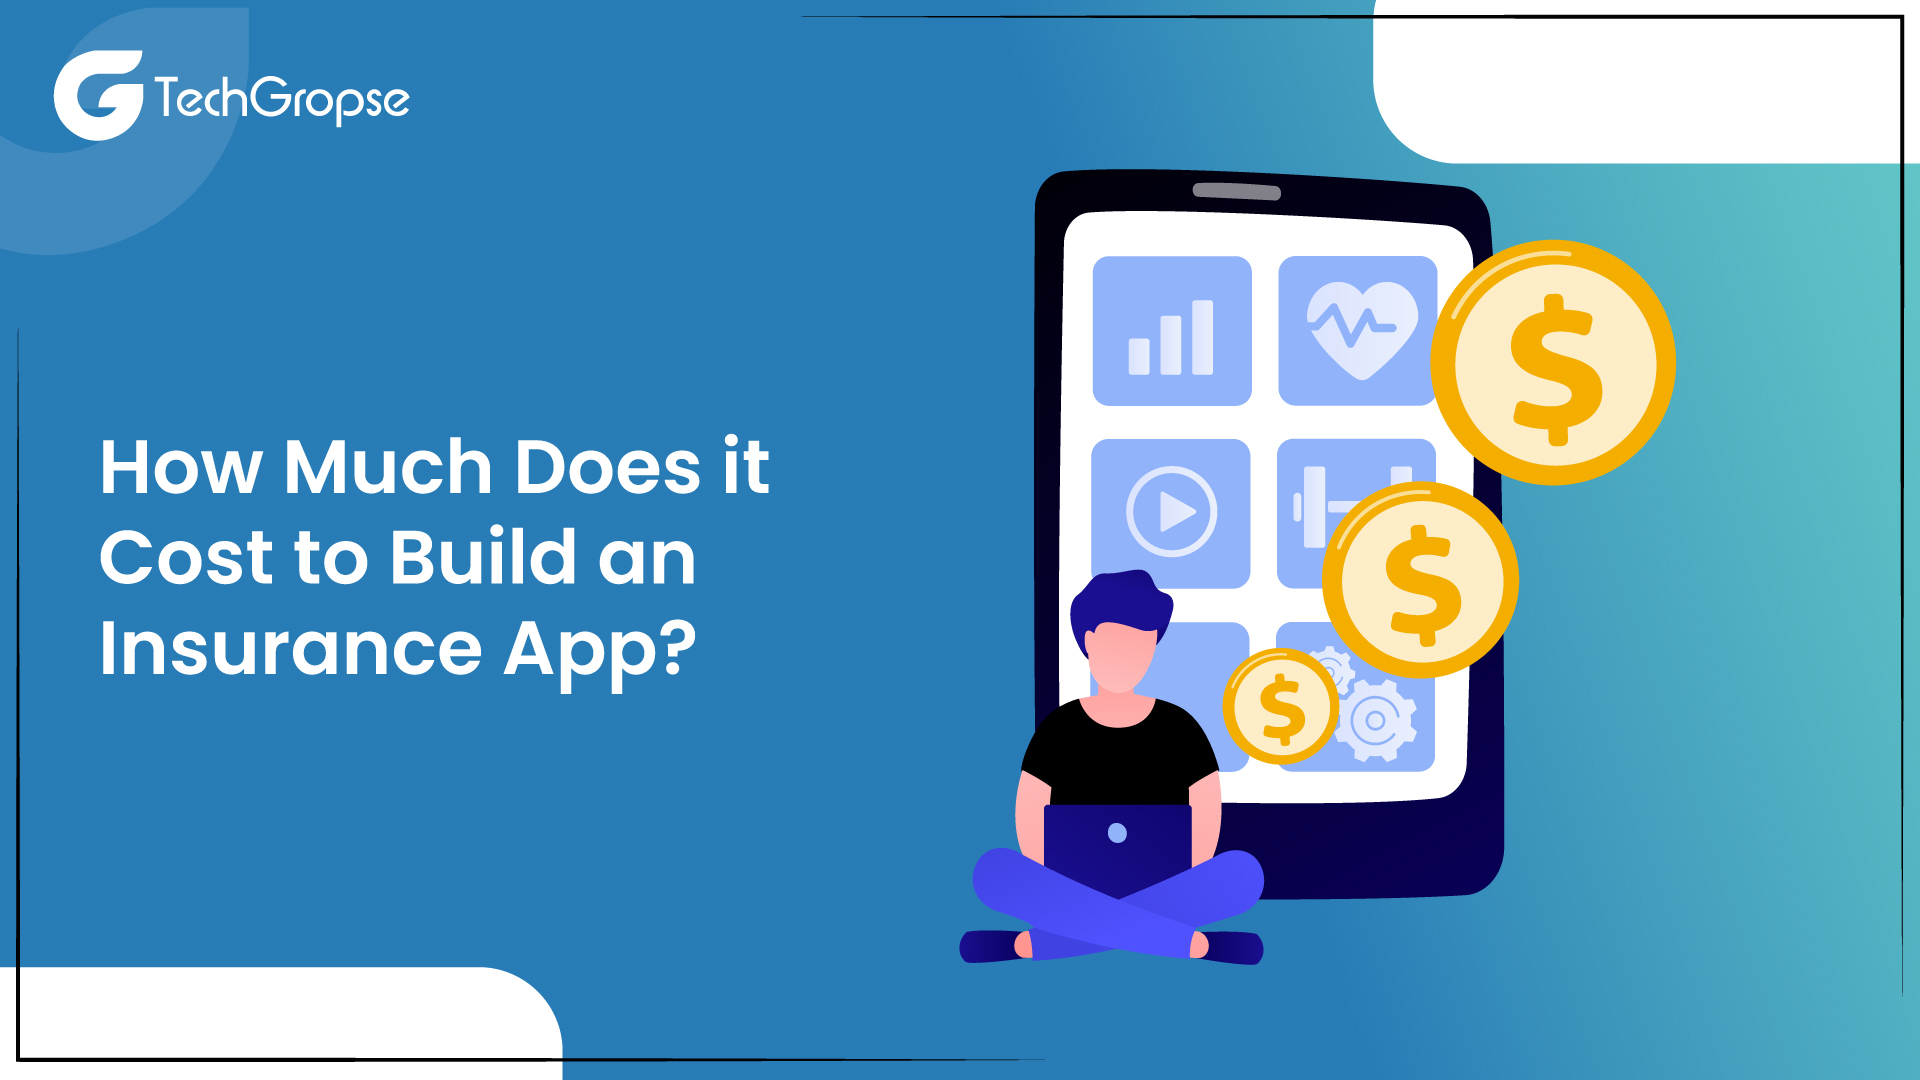 How Much Does it Cost to Build an Insurance App?